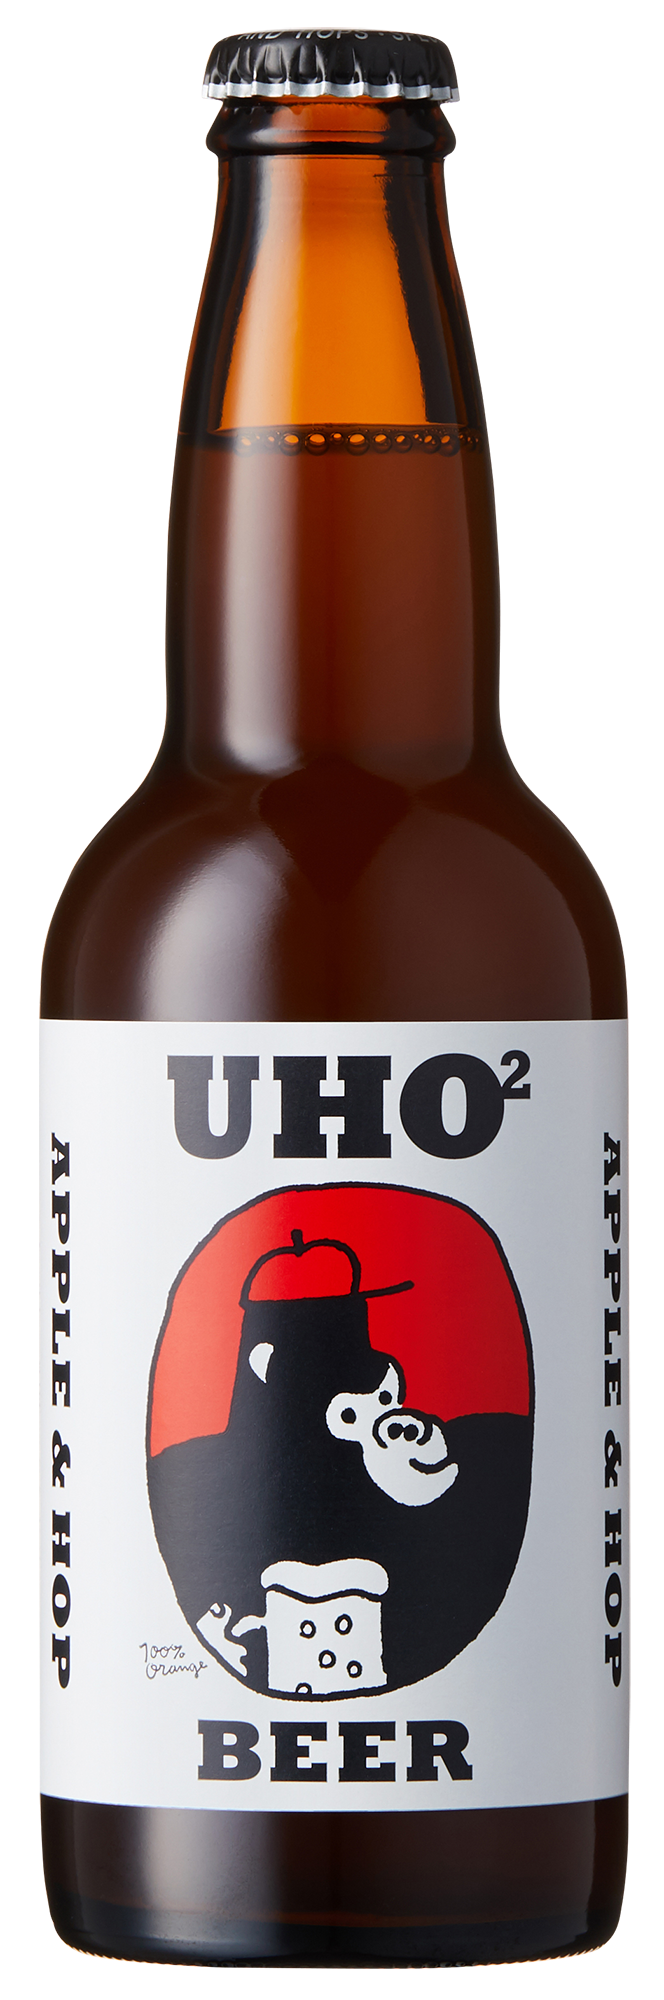 UHO UHO BEER（ウホウホビール）<img class='new_mark_img2' src='https://img.shop-pro.jp/img/new/icons48.gif' style='border:none;display:inline;margin:0px;padding:0px;width:auto;' />